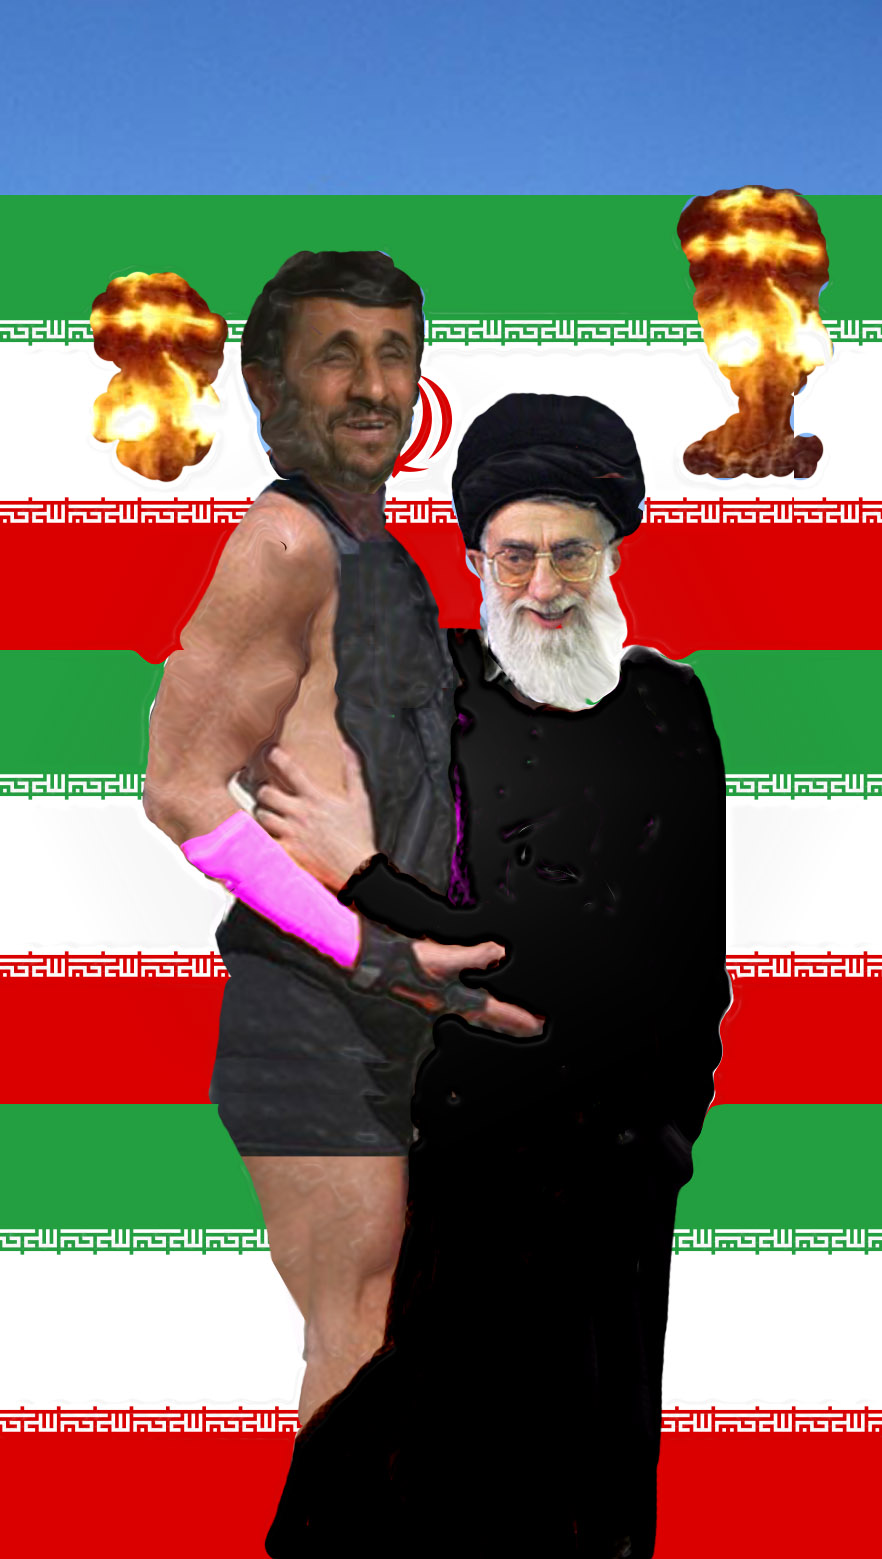 The Iranian President and the Supreme Leader getting a little too close.  